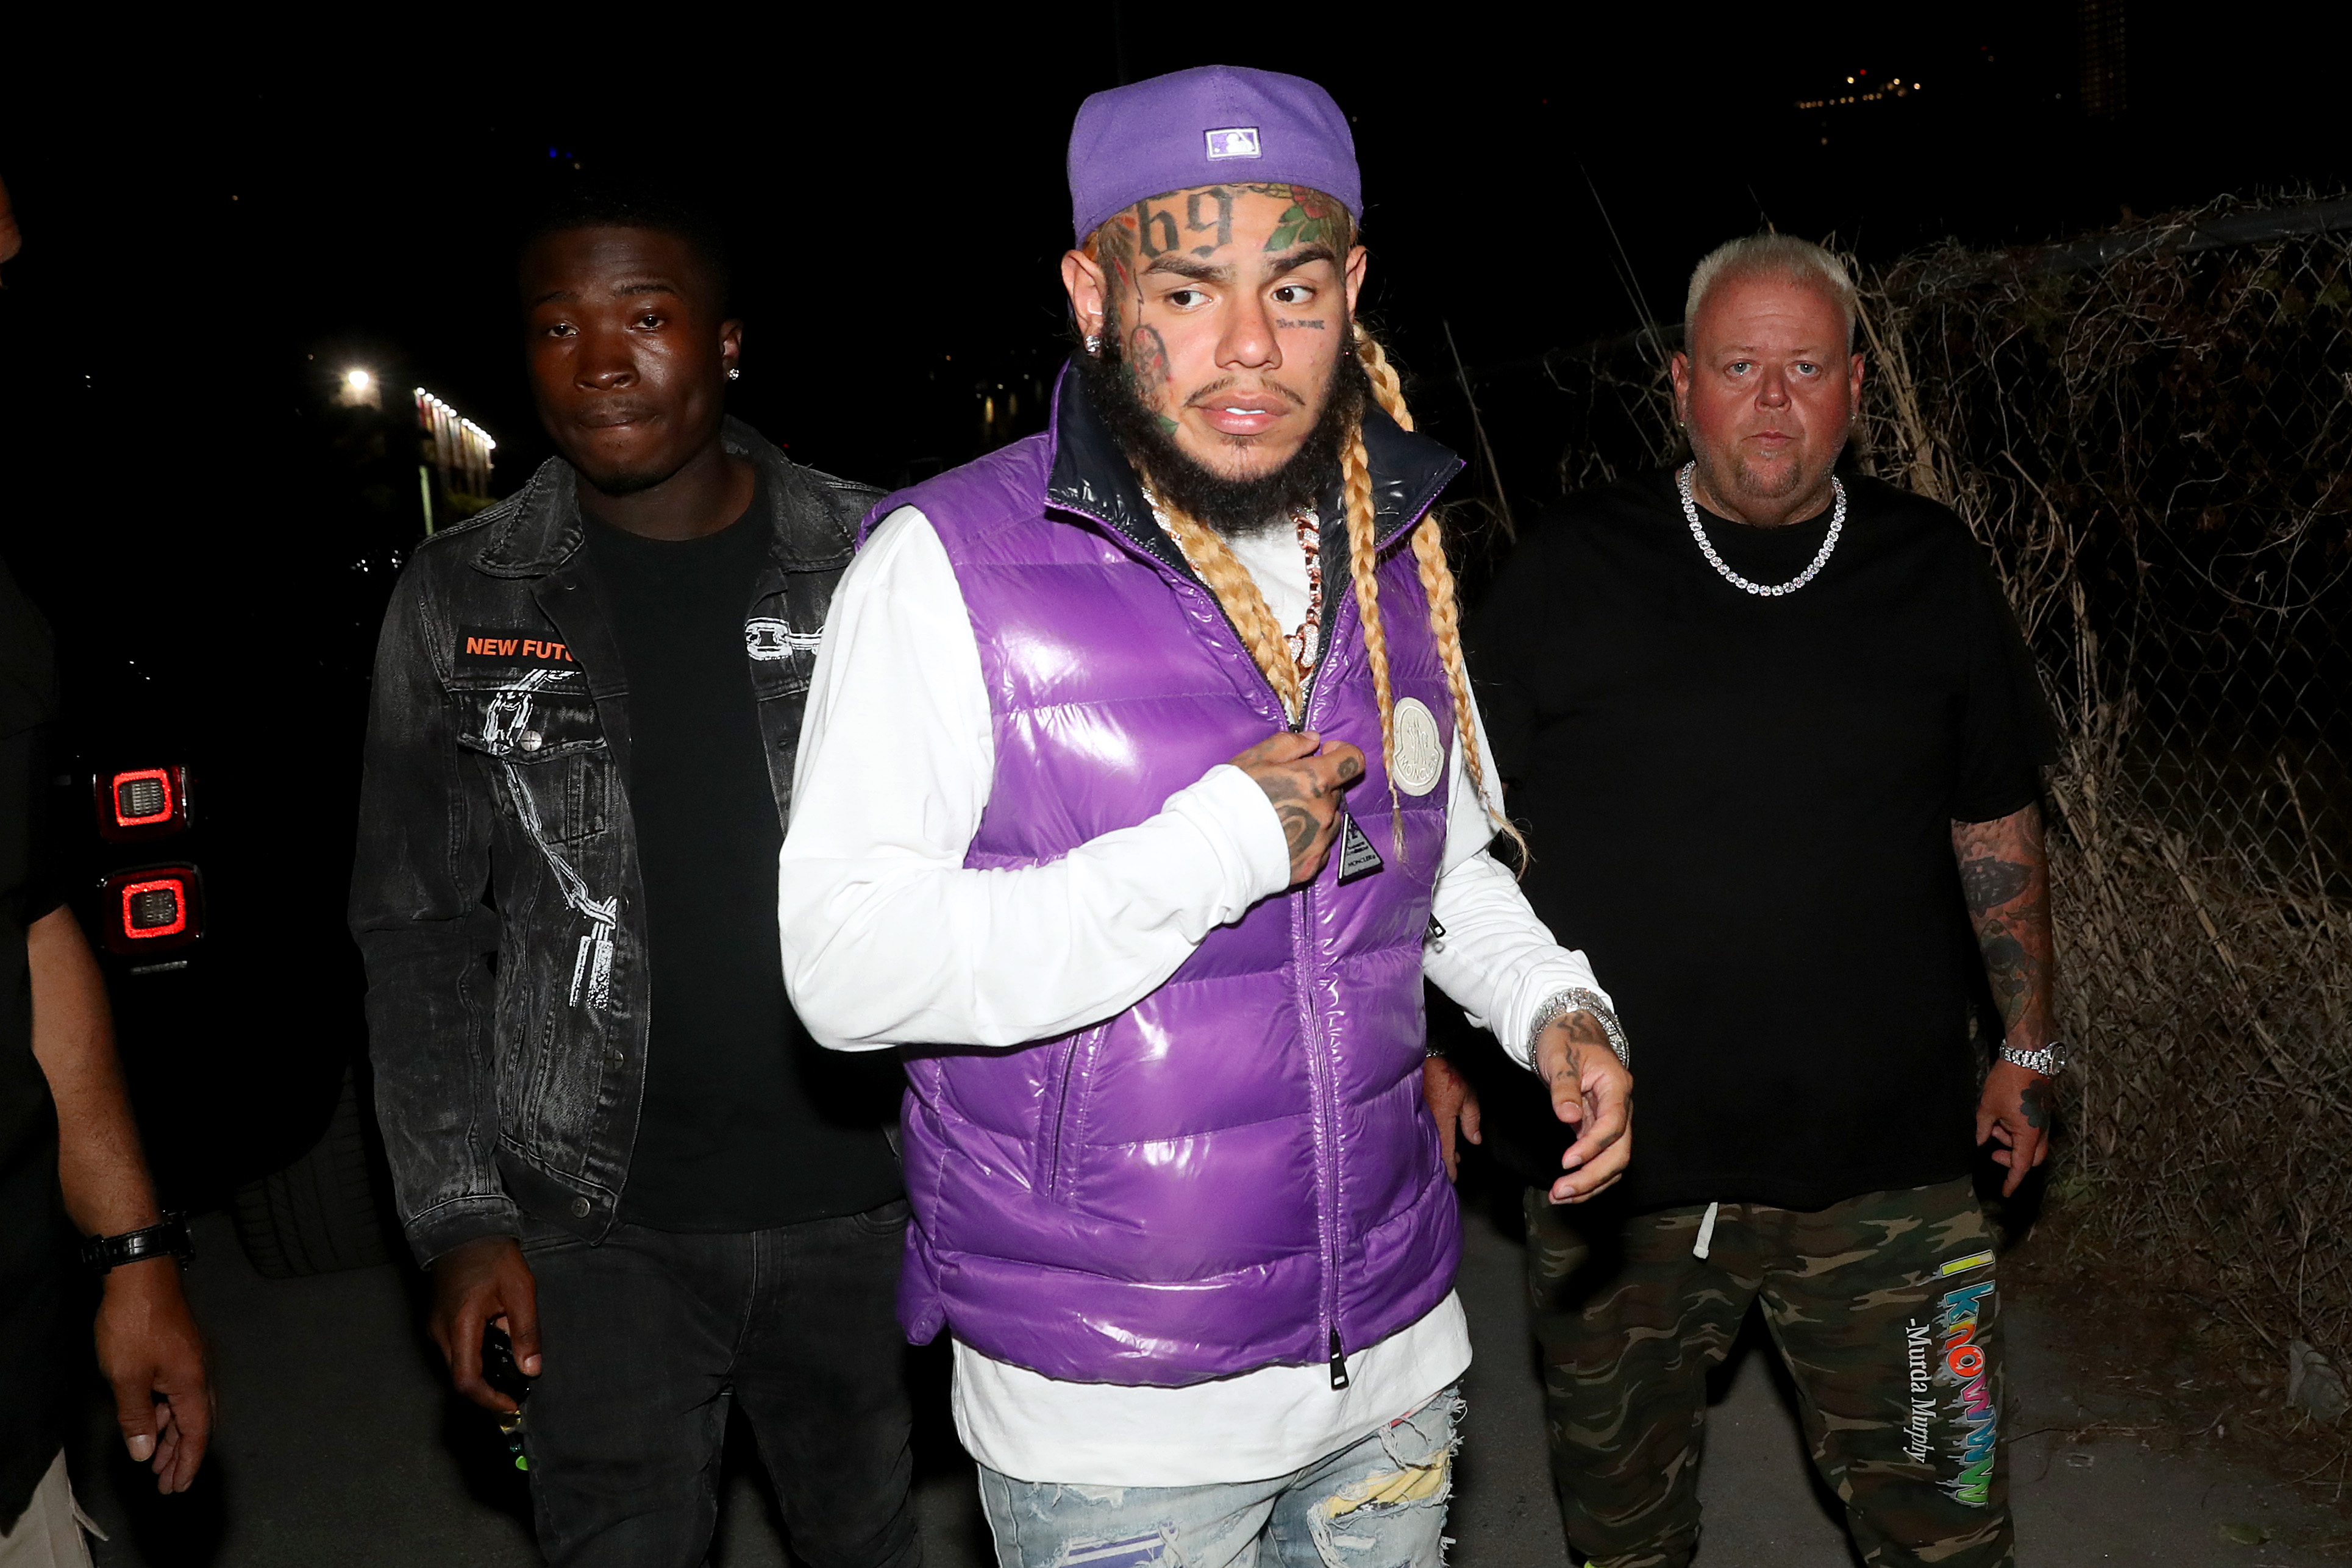 6ix9ine Lashes Out At Billboard Amid Merch Album Sales Reinstatement: “Anything Just To Not See Me Win”